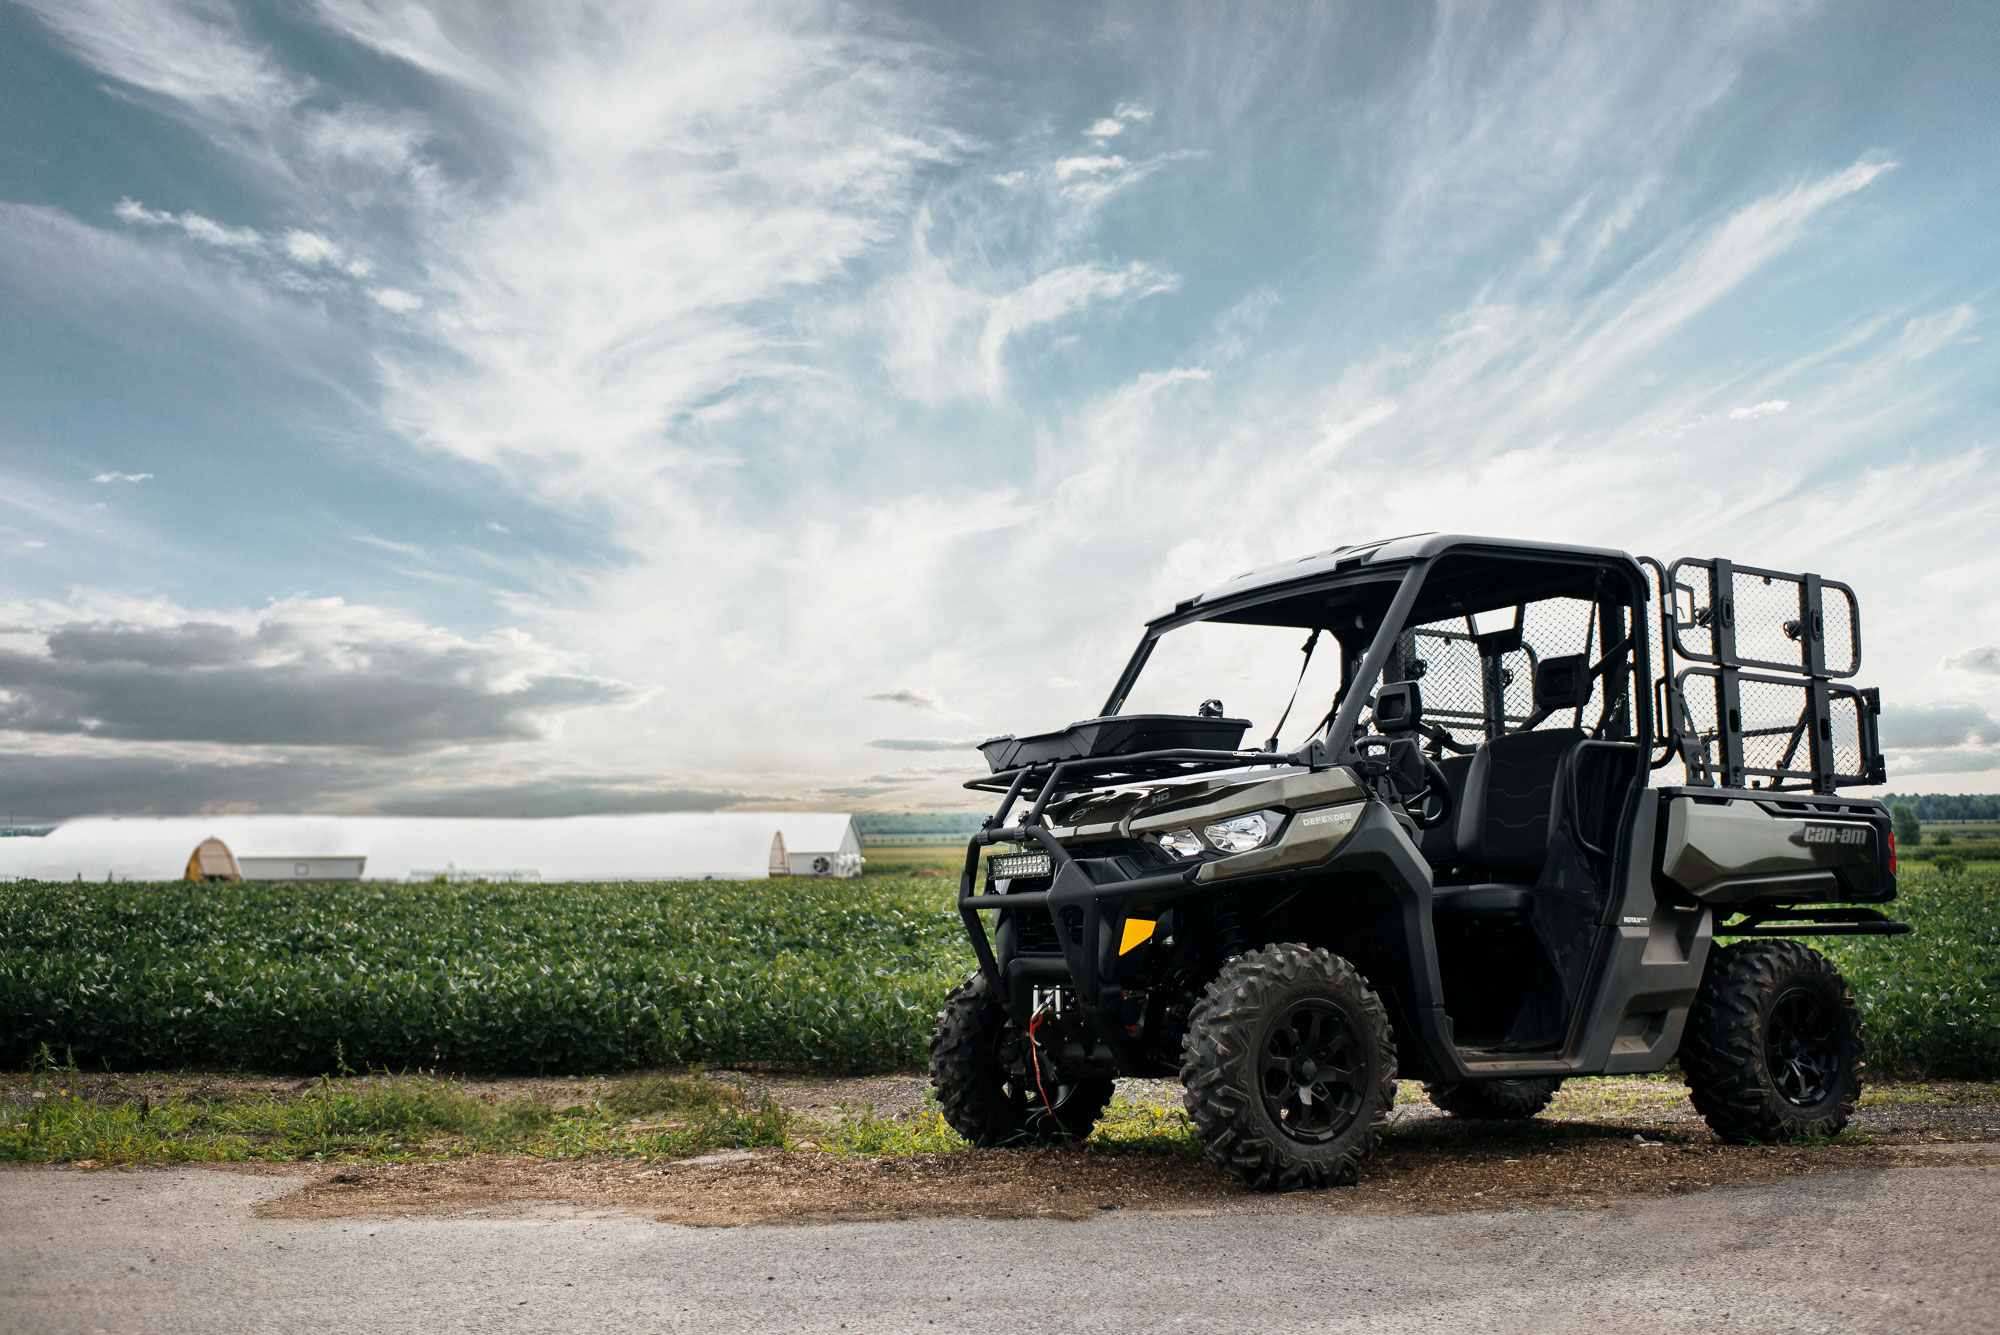 A customized Can-Am Defender XT side-by-side